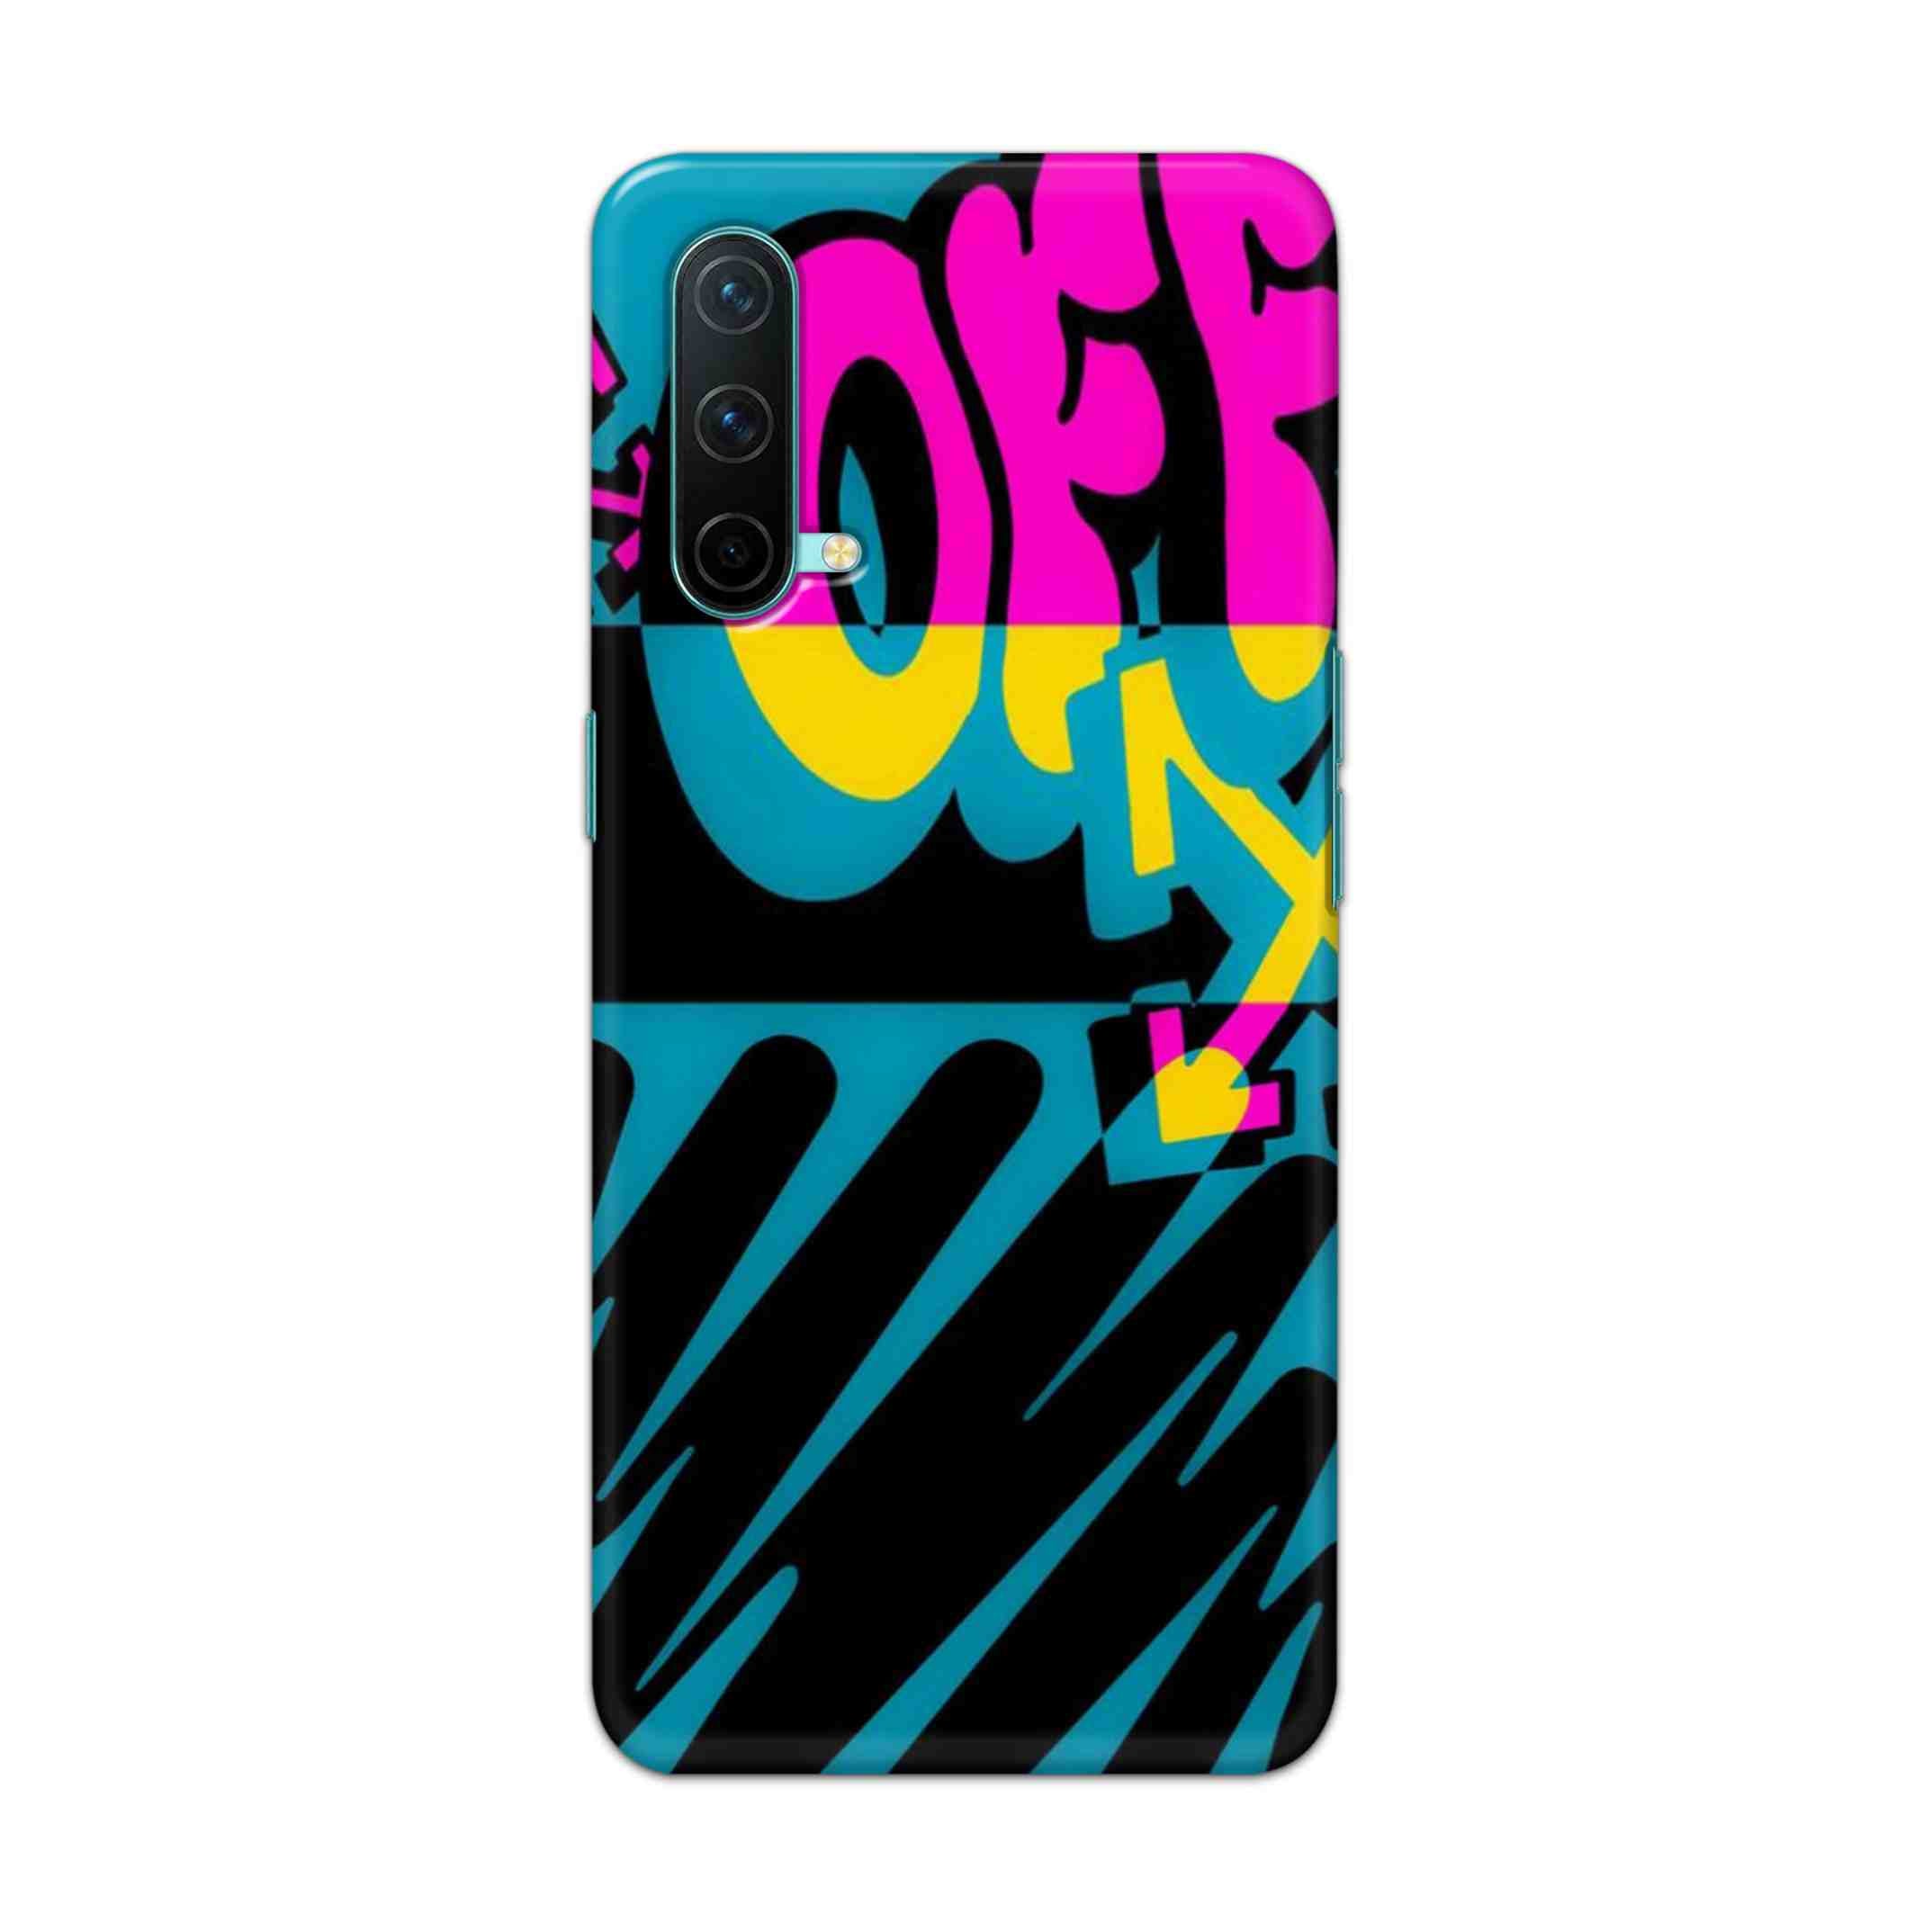 Buy Off Hard Back Mobile Phone Case Cover For OnePlus Nord CE Online